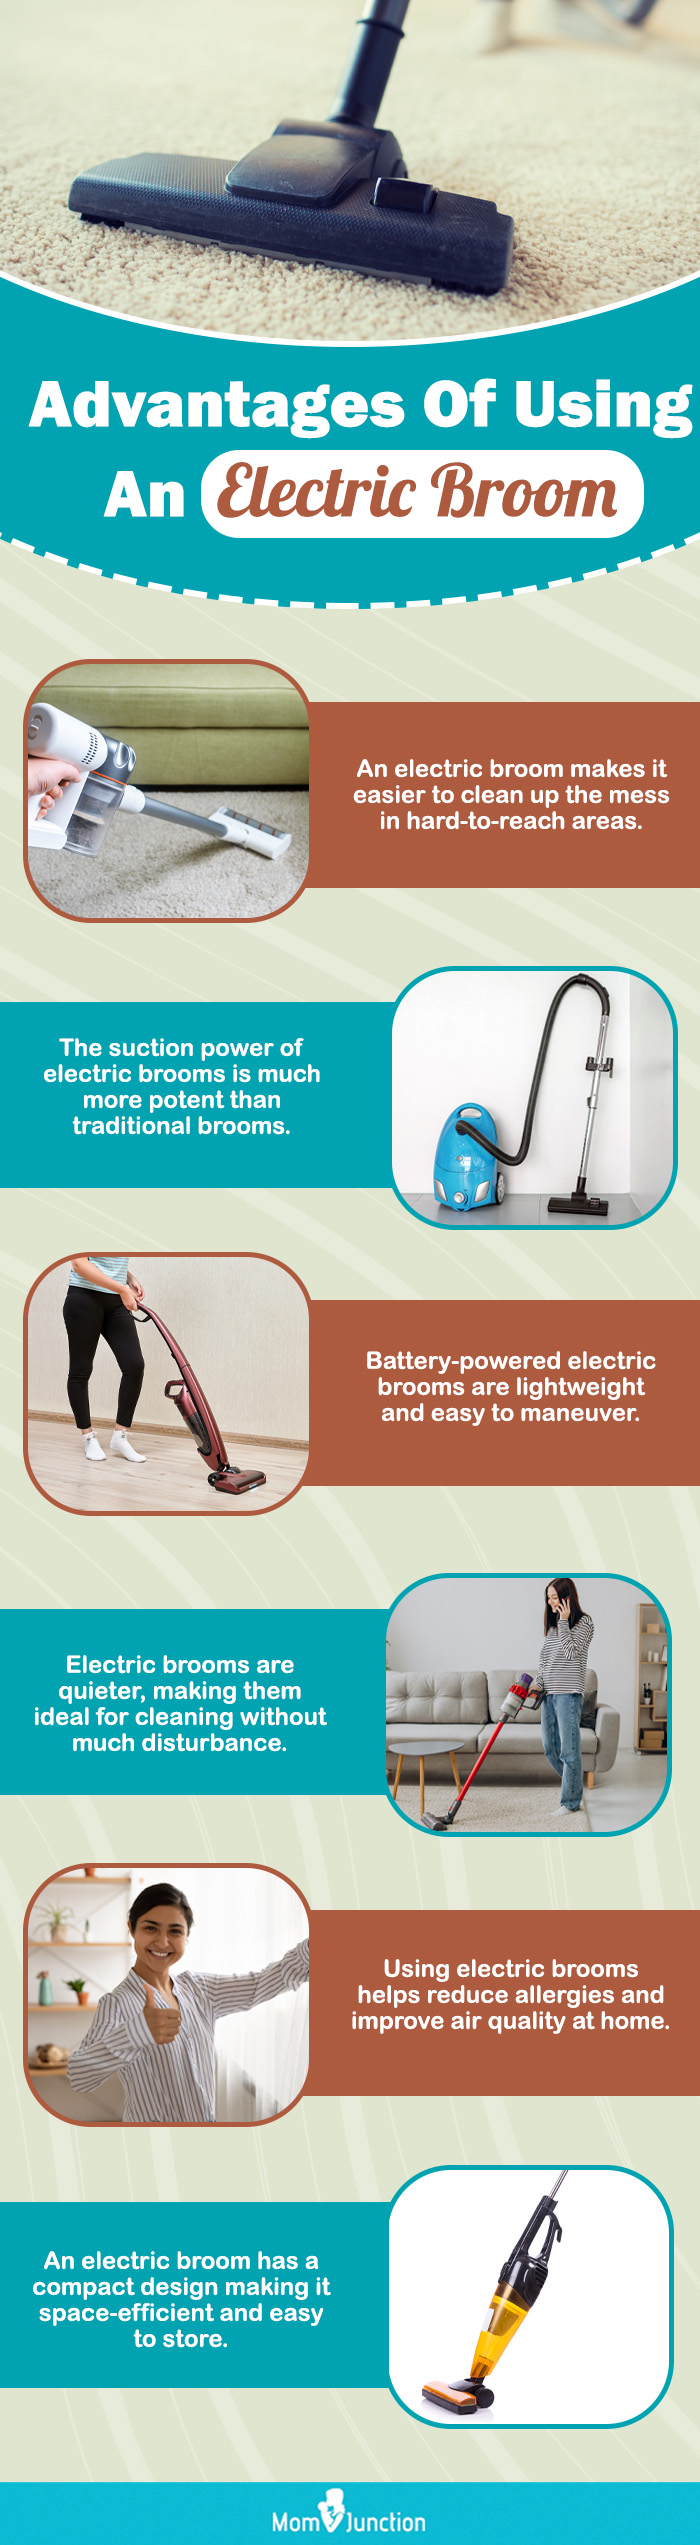 Advantages Of Using An Electric Broom (infographic)